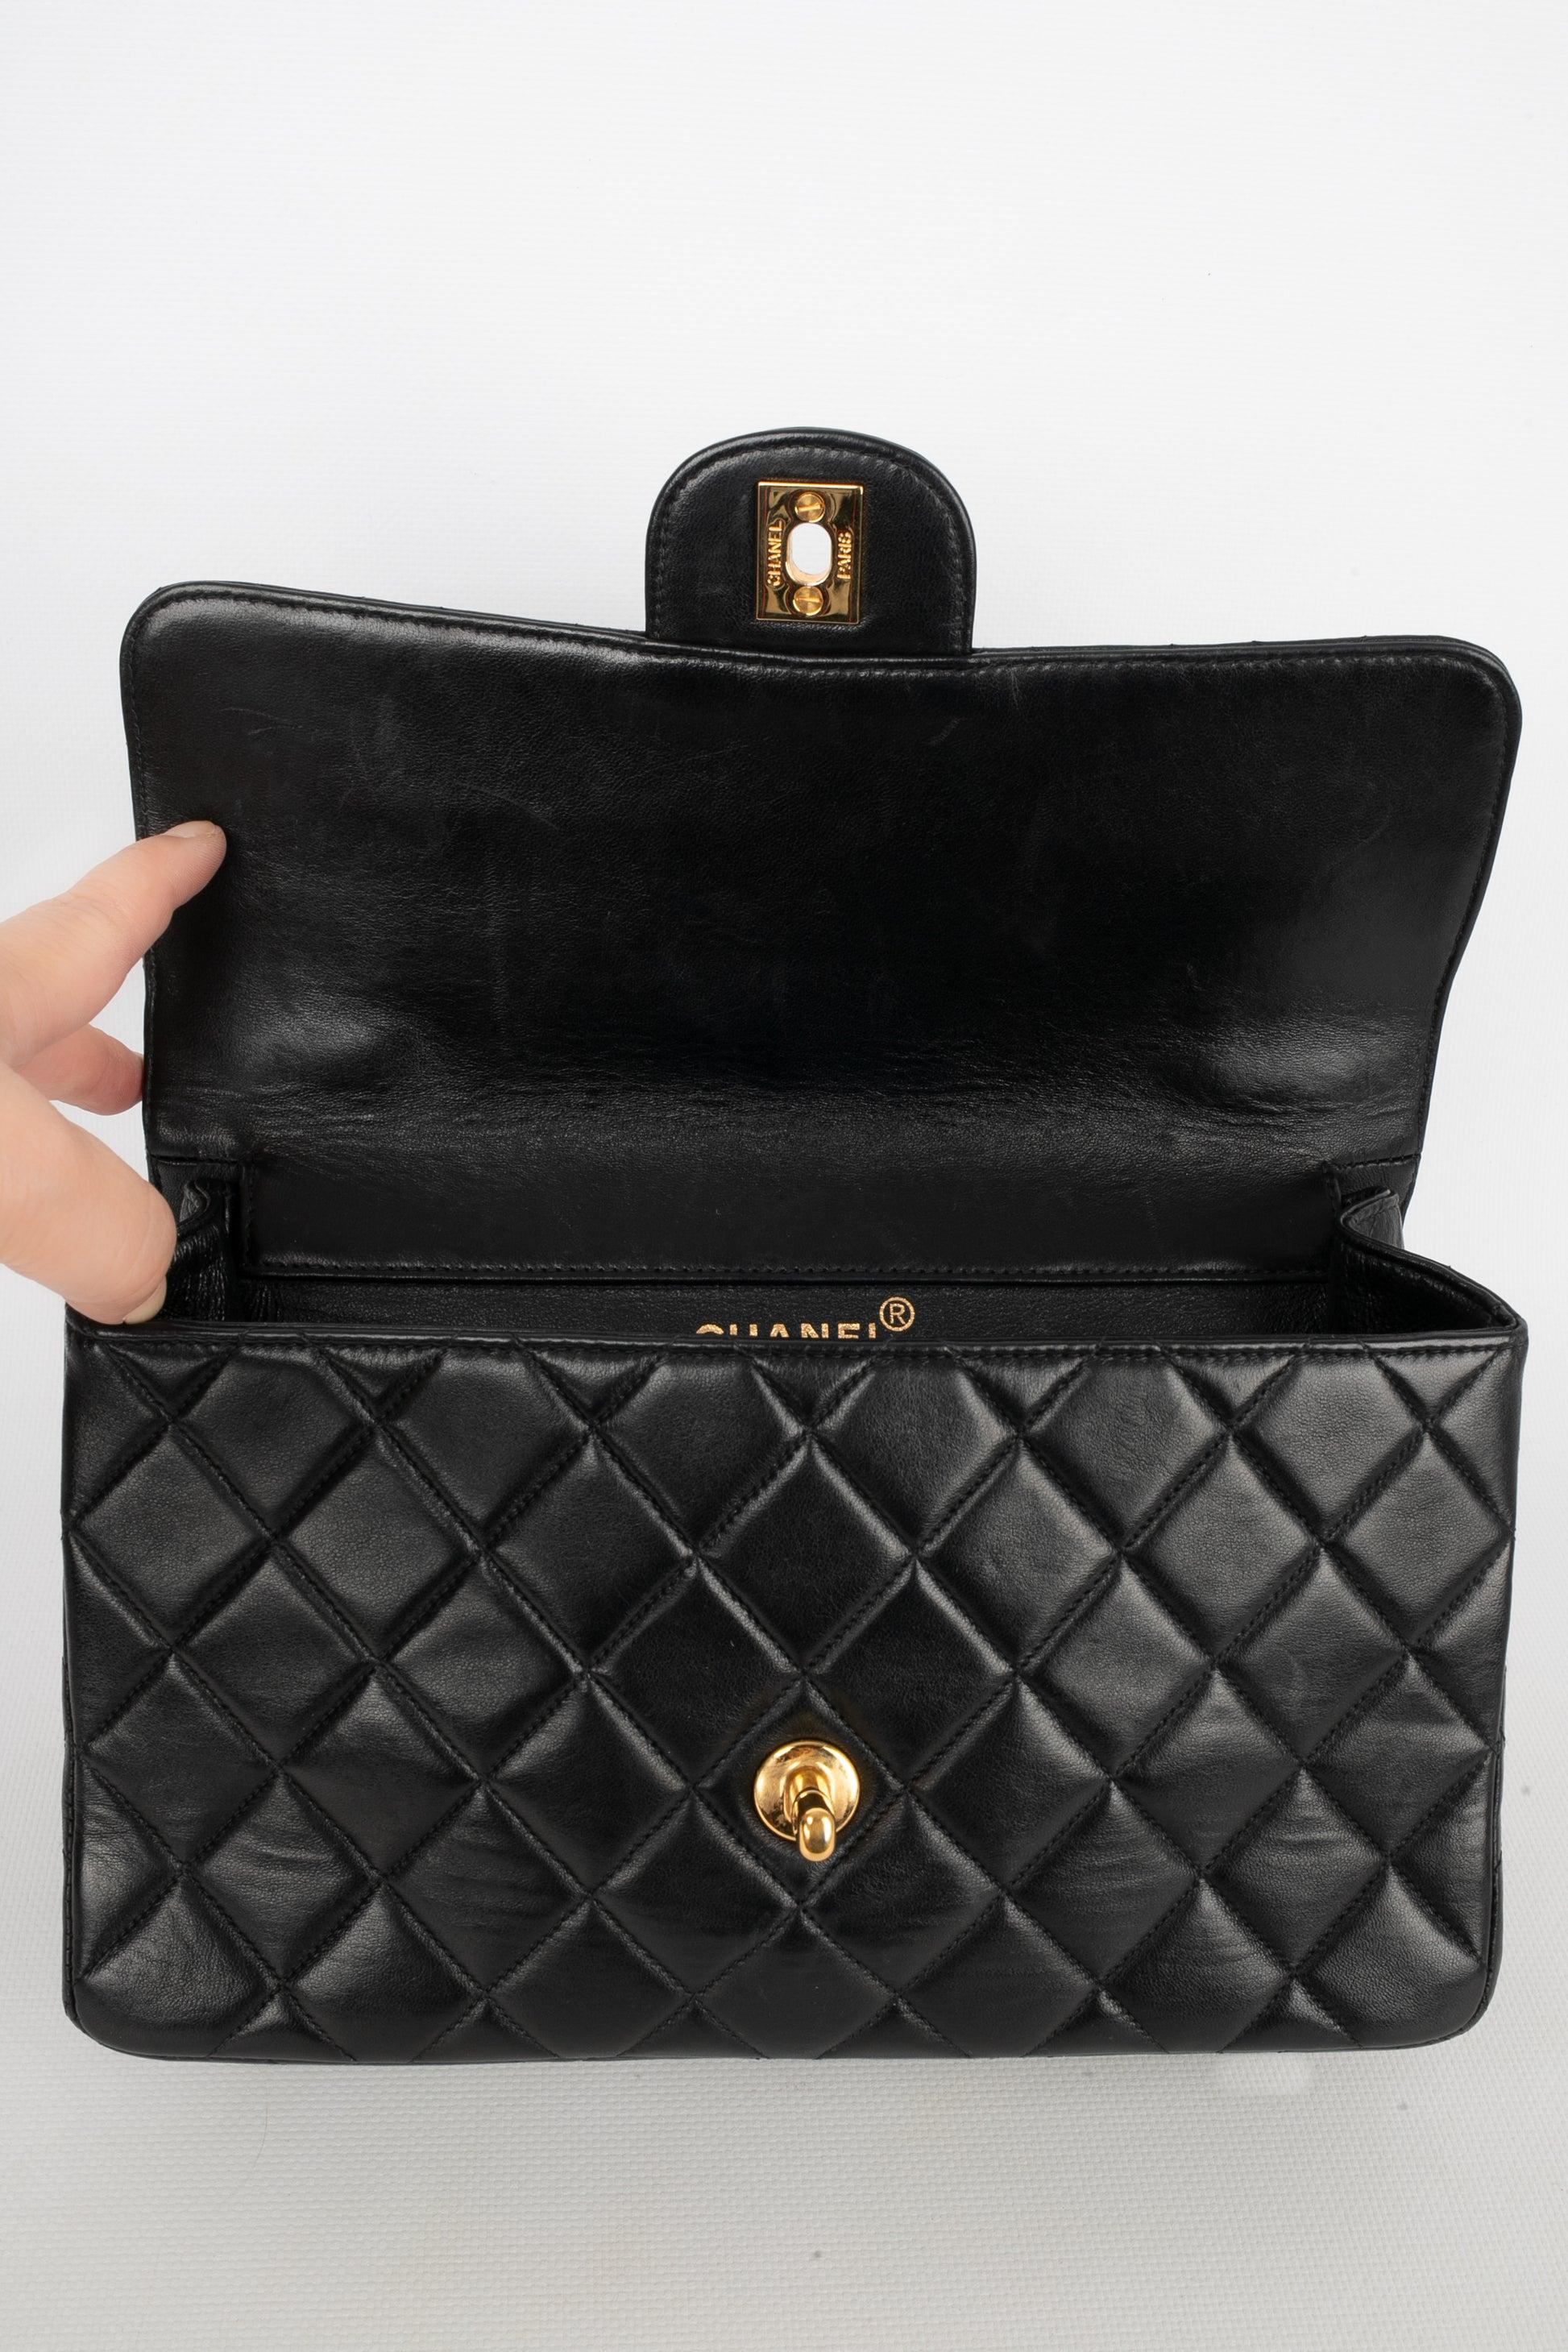 Chanel Timeless Quilted Black Leather Bag, 1996/1997 For Sale 4